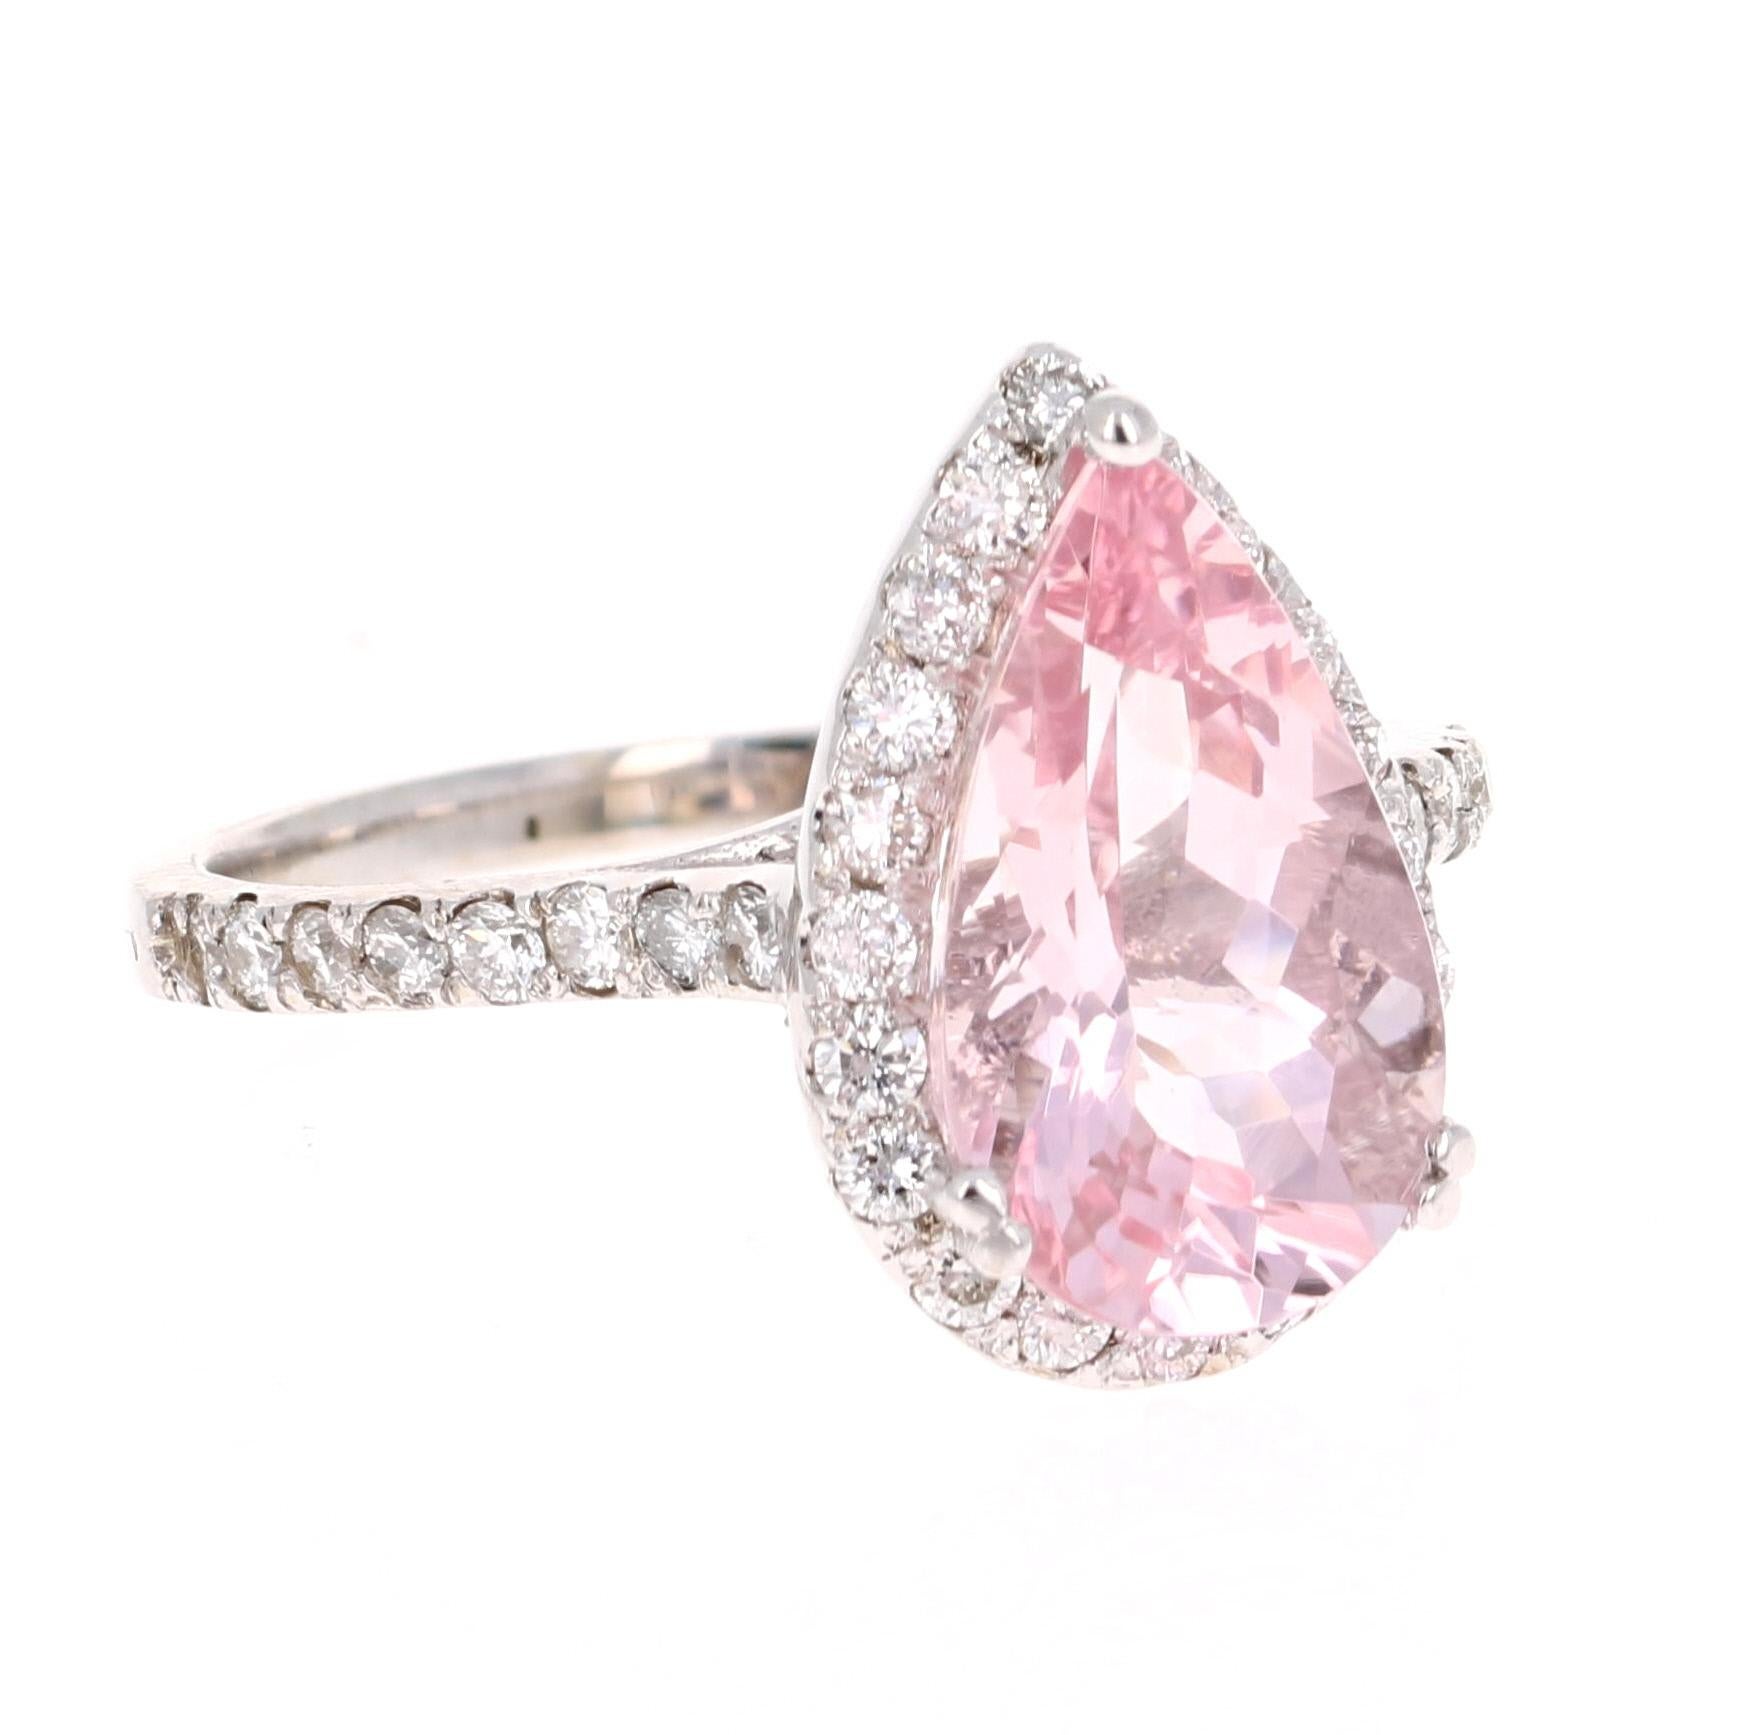 A lovely Engagement Ring Option or as an alternate to a Pink Diamond Ring! 

This gorgeous and classy Morganite and Diamond Ring has a 2.83 Carat Pear Cut Pink Morganite and has 39 Round Cut Diamonds that weigh 0.54 carats (Clarity: VS2, Color: H).